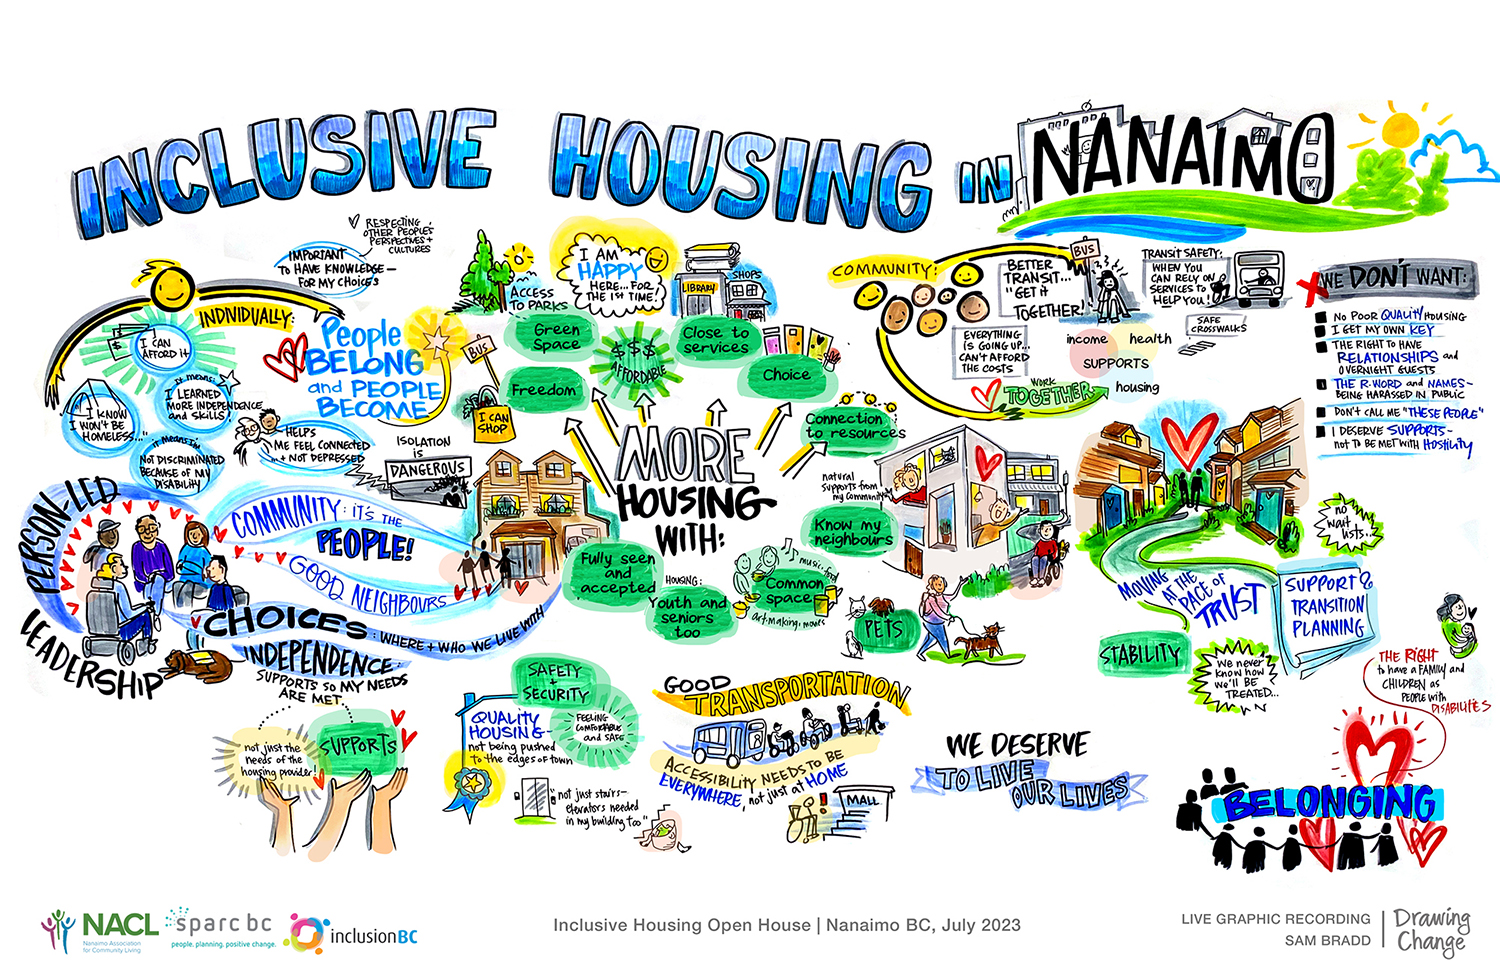 A graphic recording of the inclusive housing open house in Nanaimo. The conversations are depicted as groups of words around relevant illustrations. The heading at the top of the page reads: Inclusive housing in Nanaimo. Main headings include: More housing with freedom, green spade, affordable, close to services, choice, connection to resources, know my neighbours, common space, pets, stability, youth and seniors, safety and security, belonging, good transportation, trust, and many more.